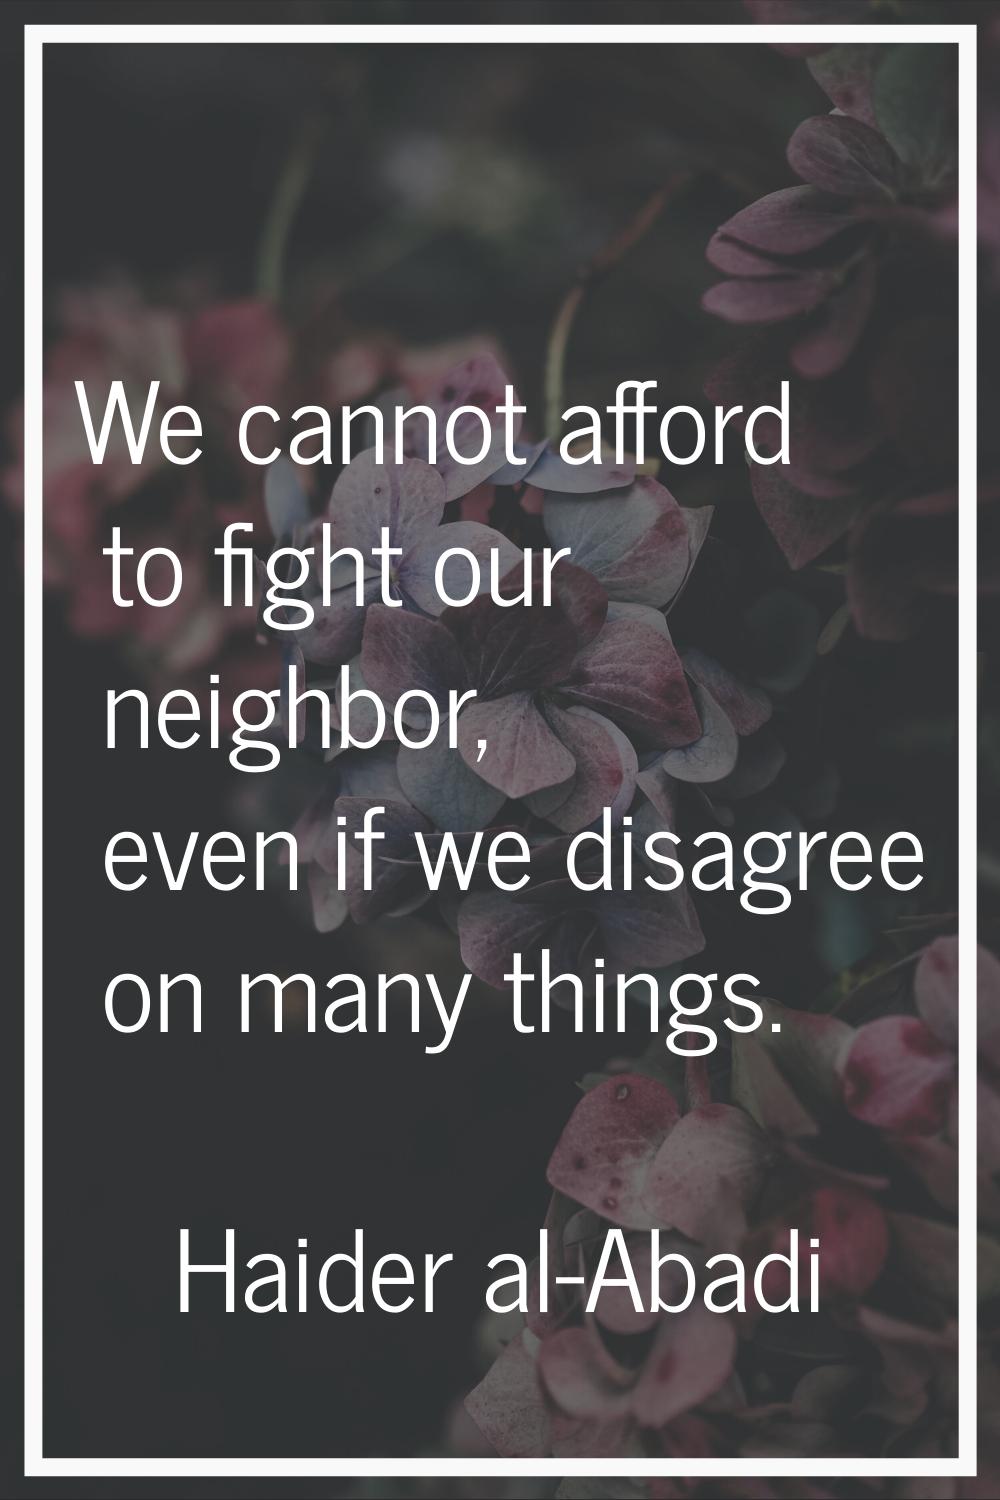 We cannot afford to fight our neighbor, even if we disagree on many things.